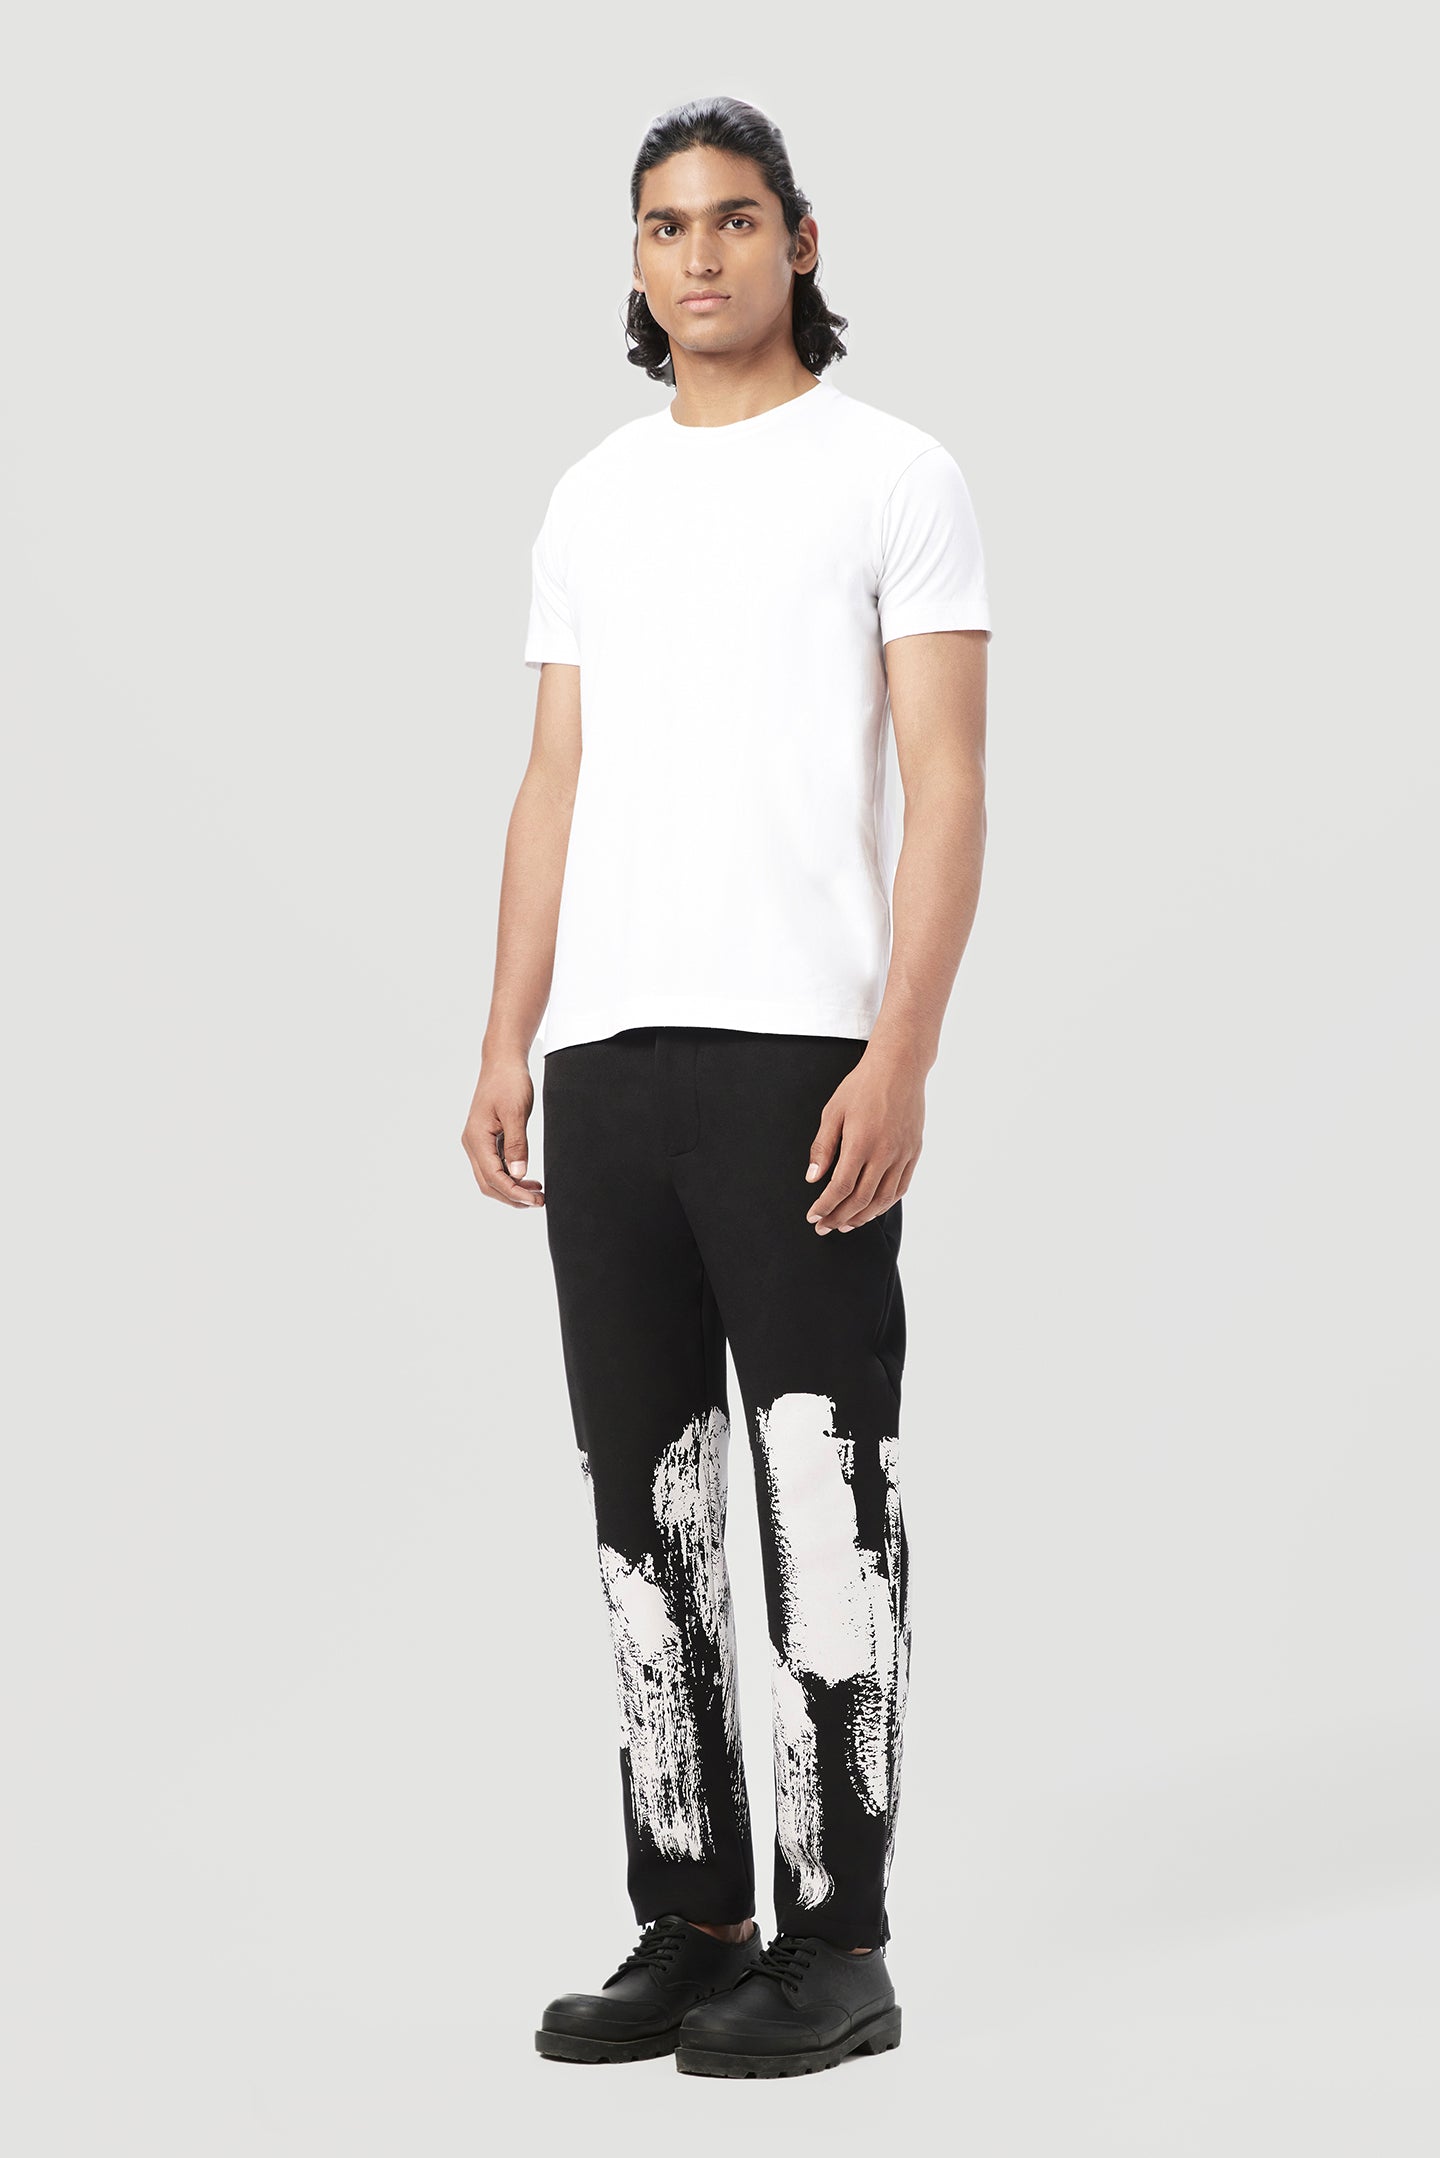 Classic Fit Trousers with Brush Effect Print Placement